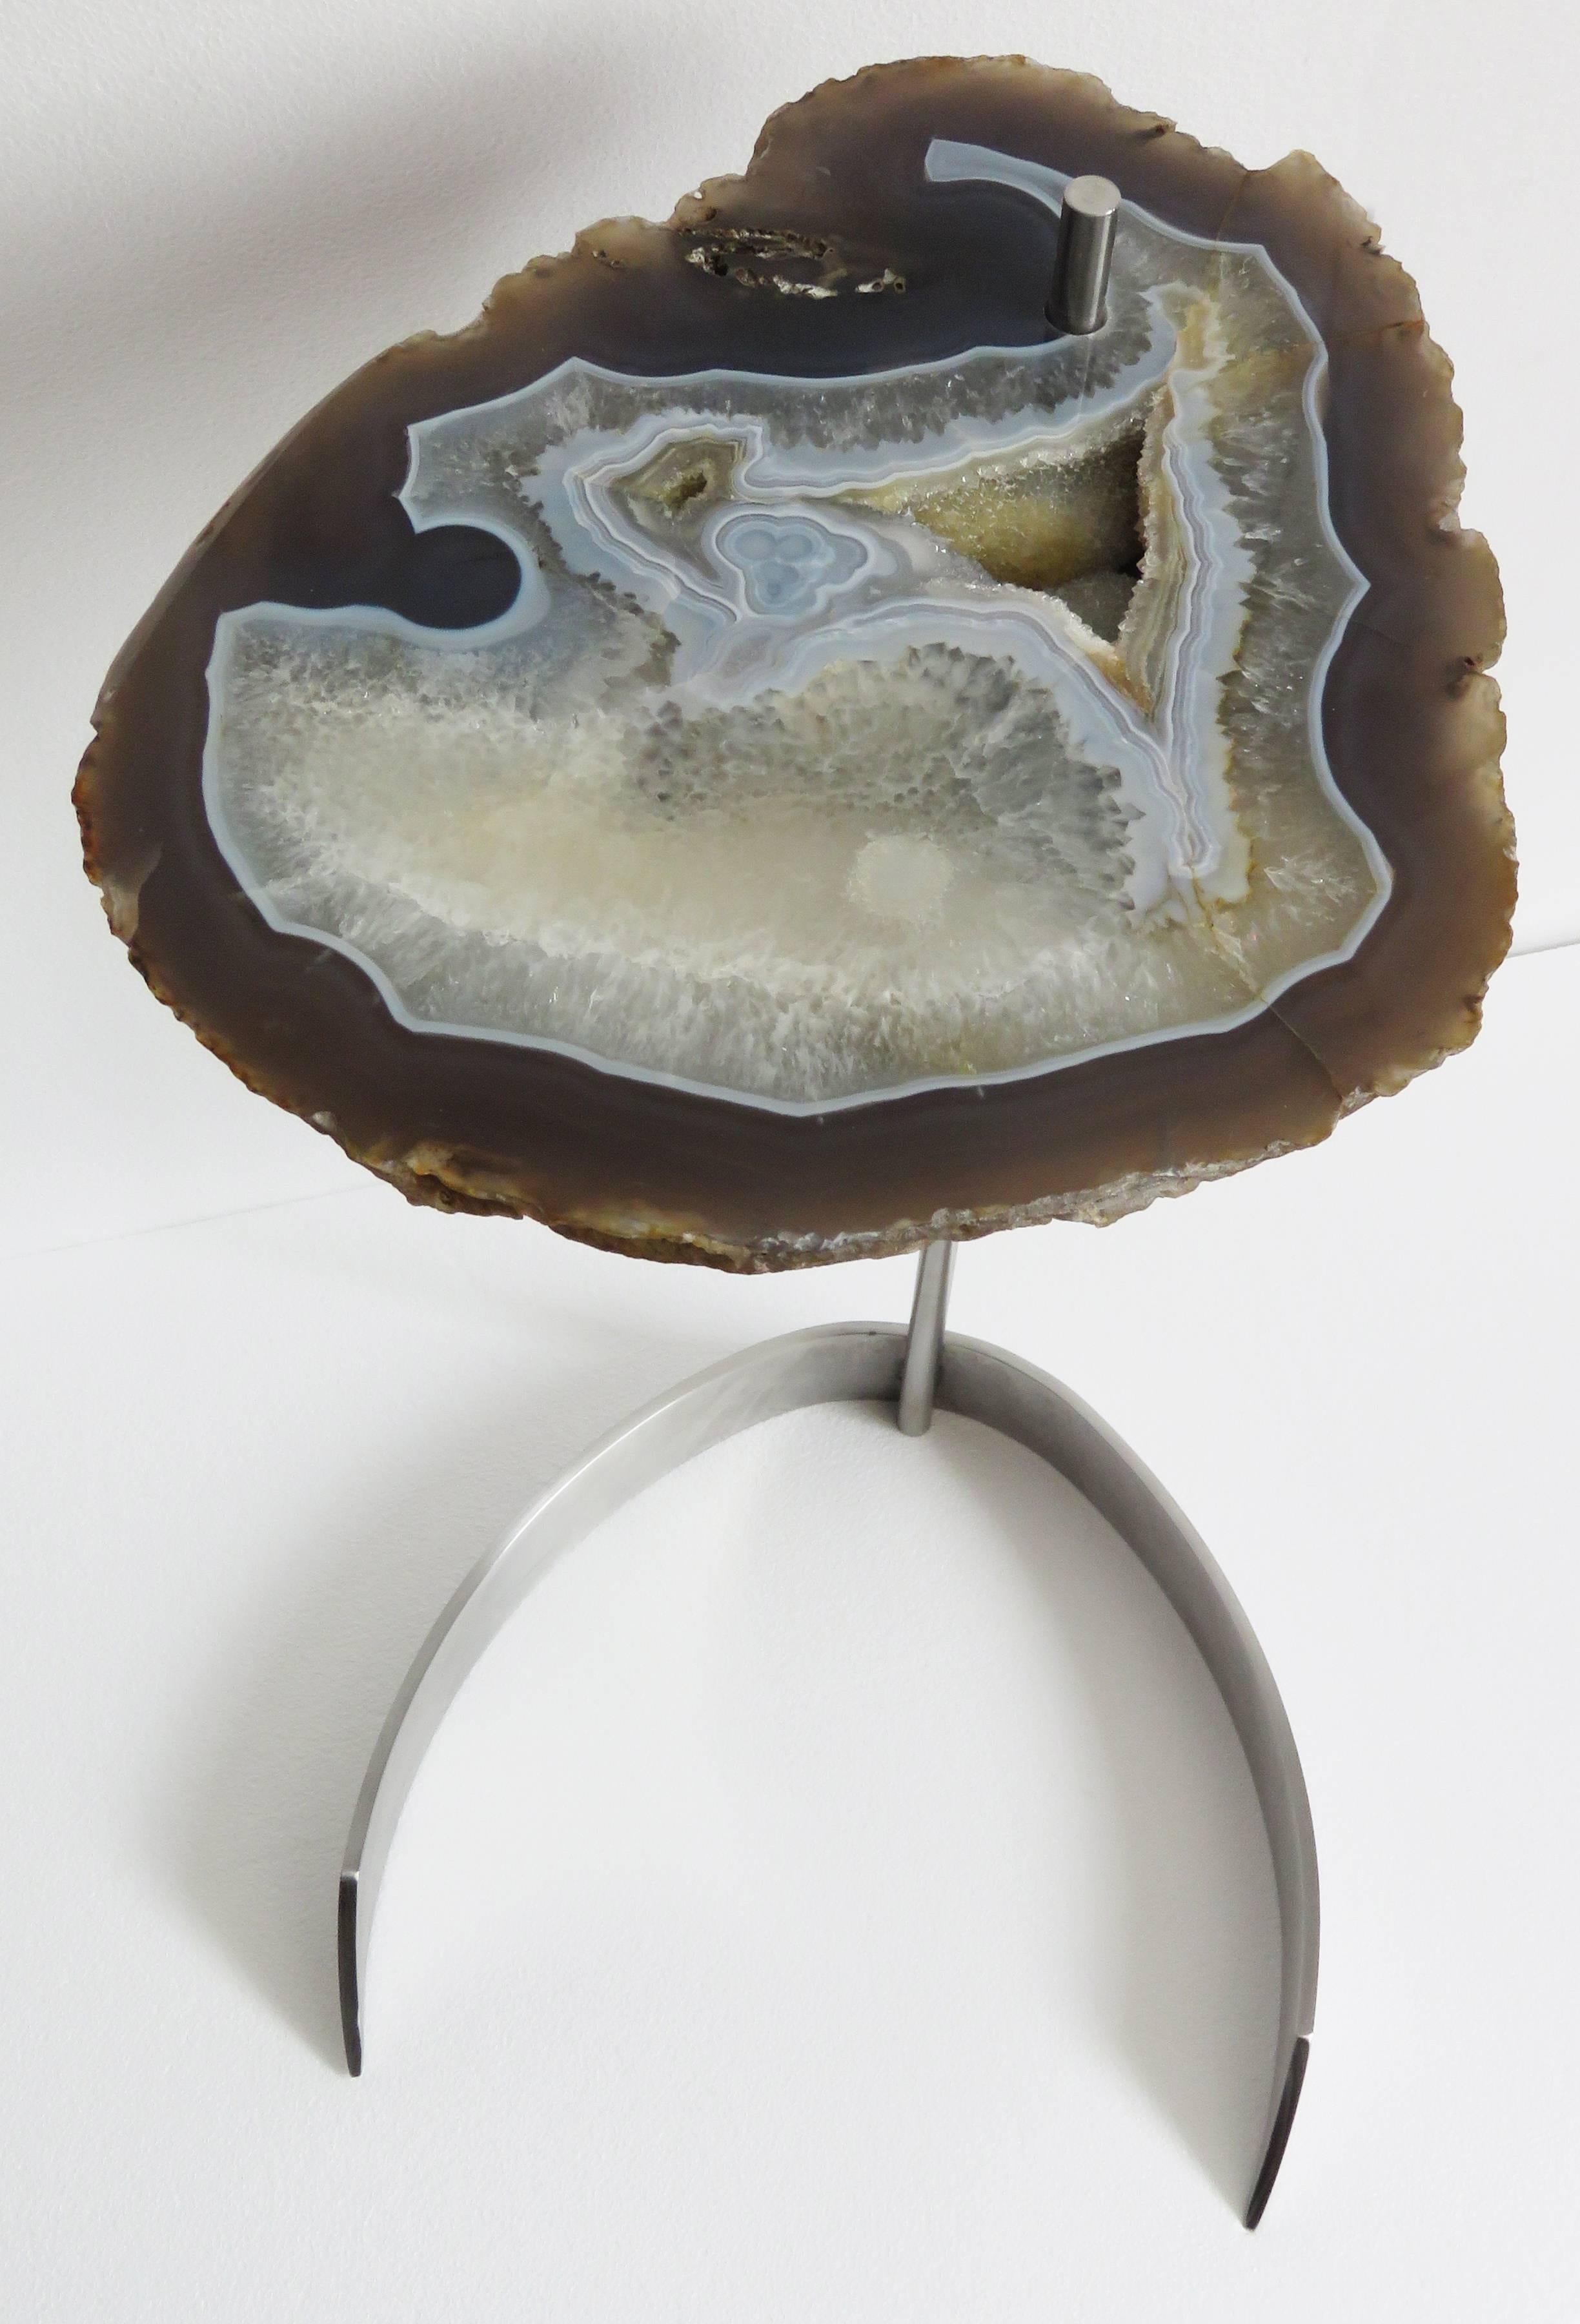 This agate slab is from Brazil, it has a combination of colors surrounding the white center with hints of blue, grey and brown. 
Agates are formed in rounded nodules, which are sliced open to bring out the internal pattern hidden in the stone.